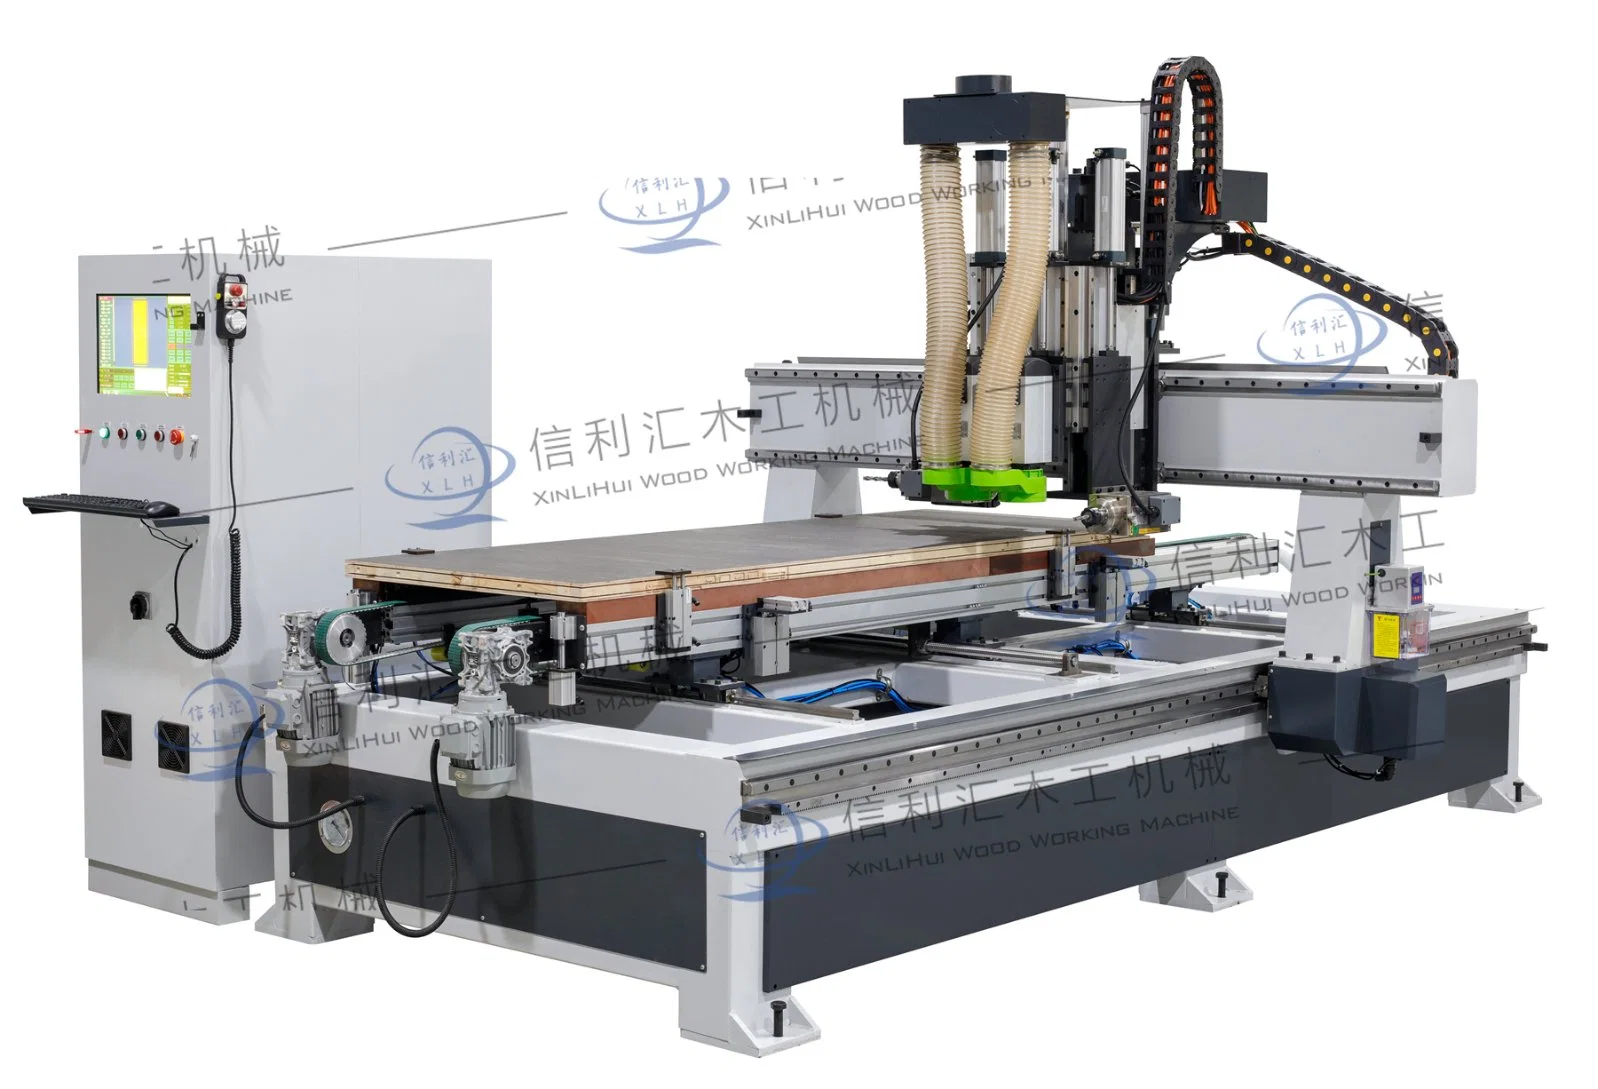 Fully Automatic Woodworking Processing Center Wooden Door Automatic Loading and Unloading CNC Processing Wooden Door Production Line Machines